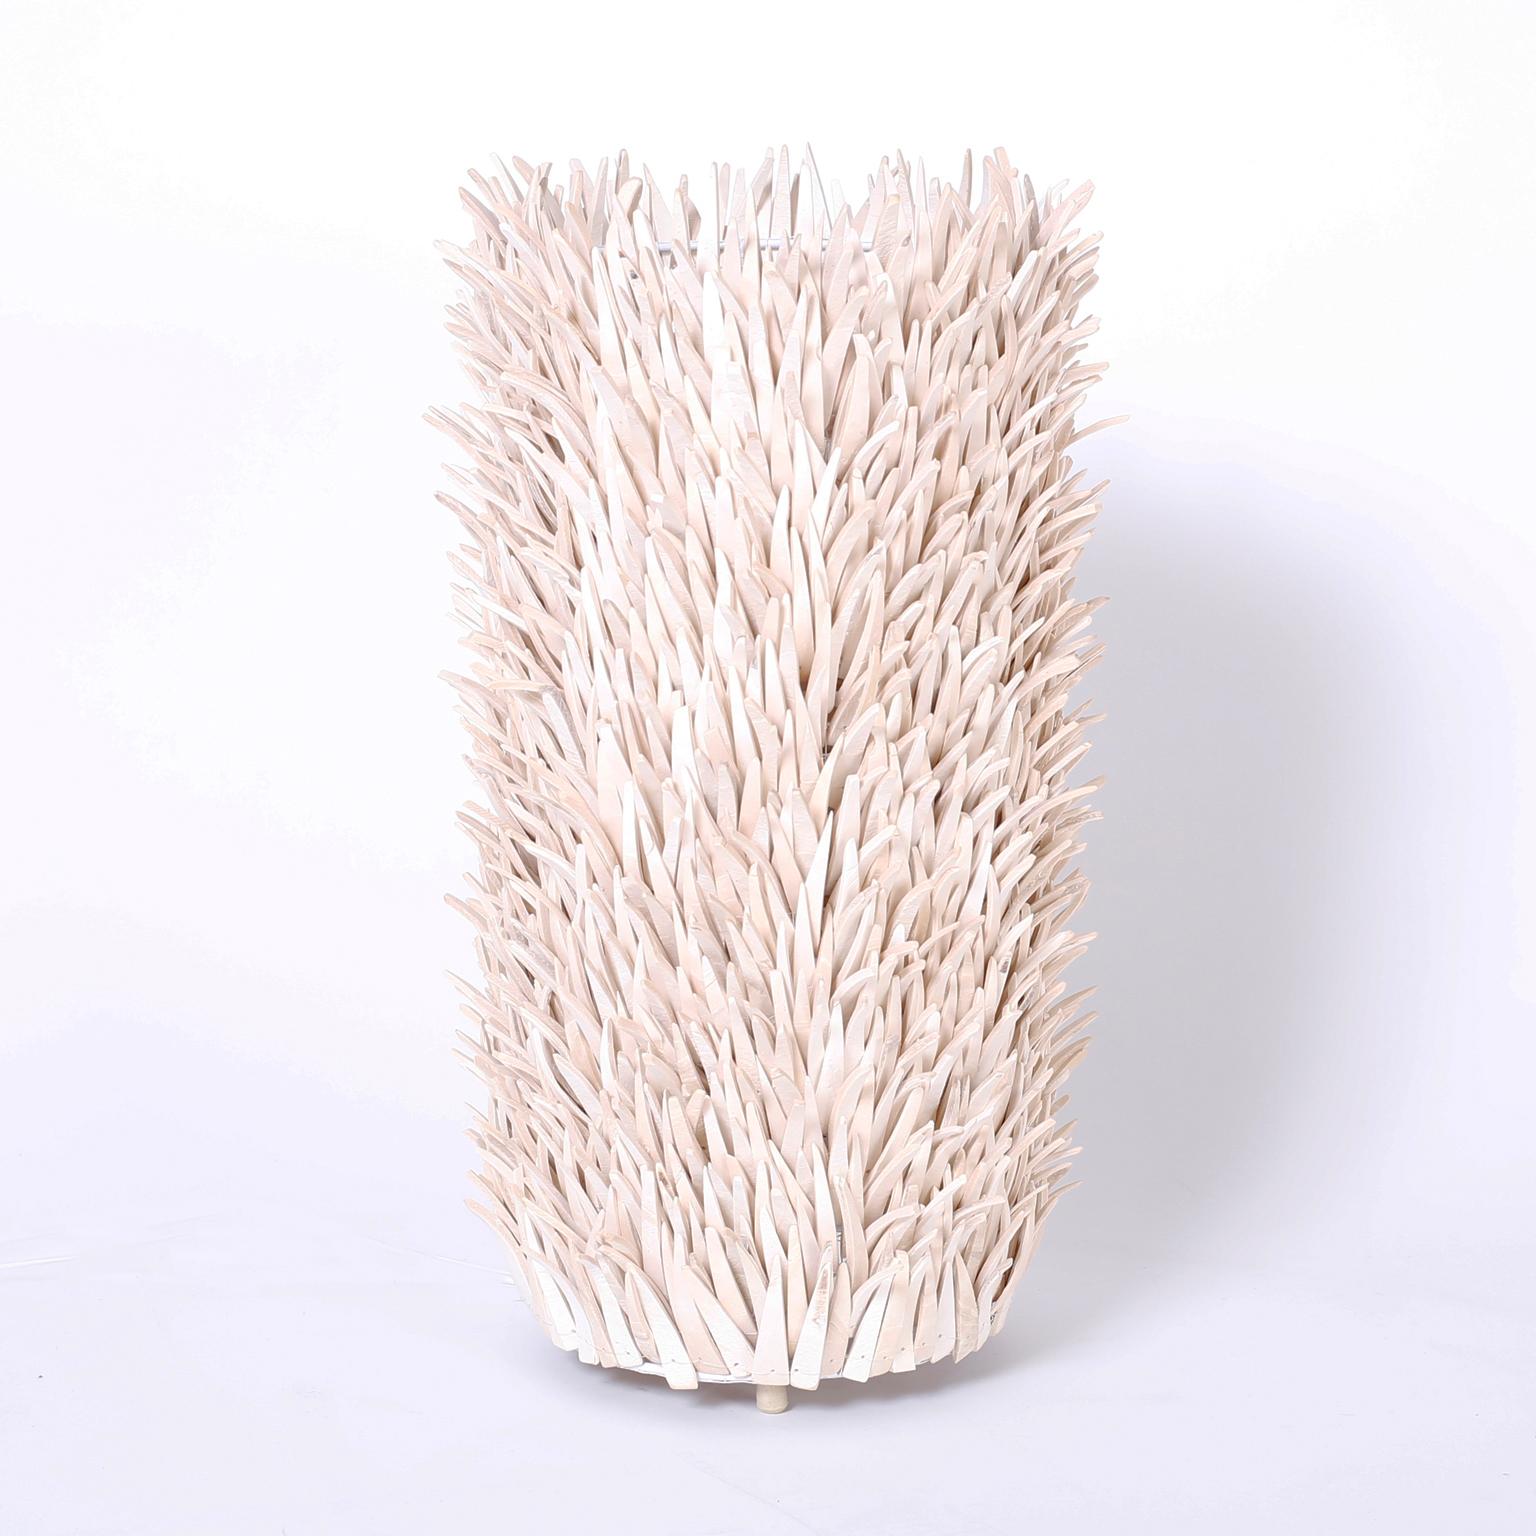 Unique pair of table lamps crafted with leather strips over a metal frame, having a strong reference to organic fauna and flora or sea urchins.